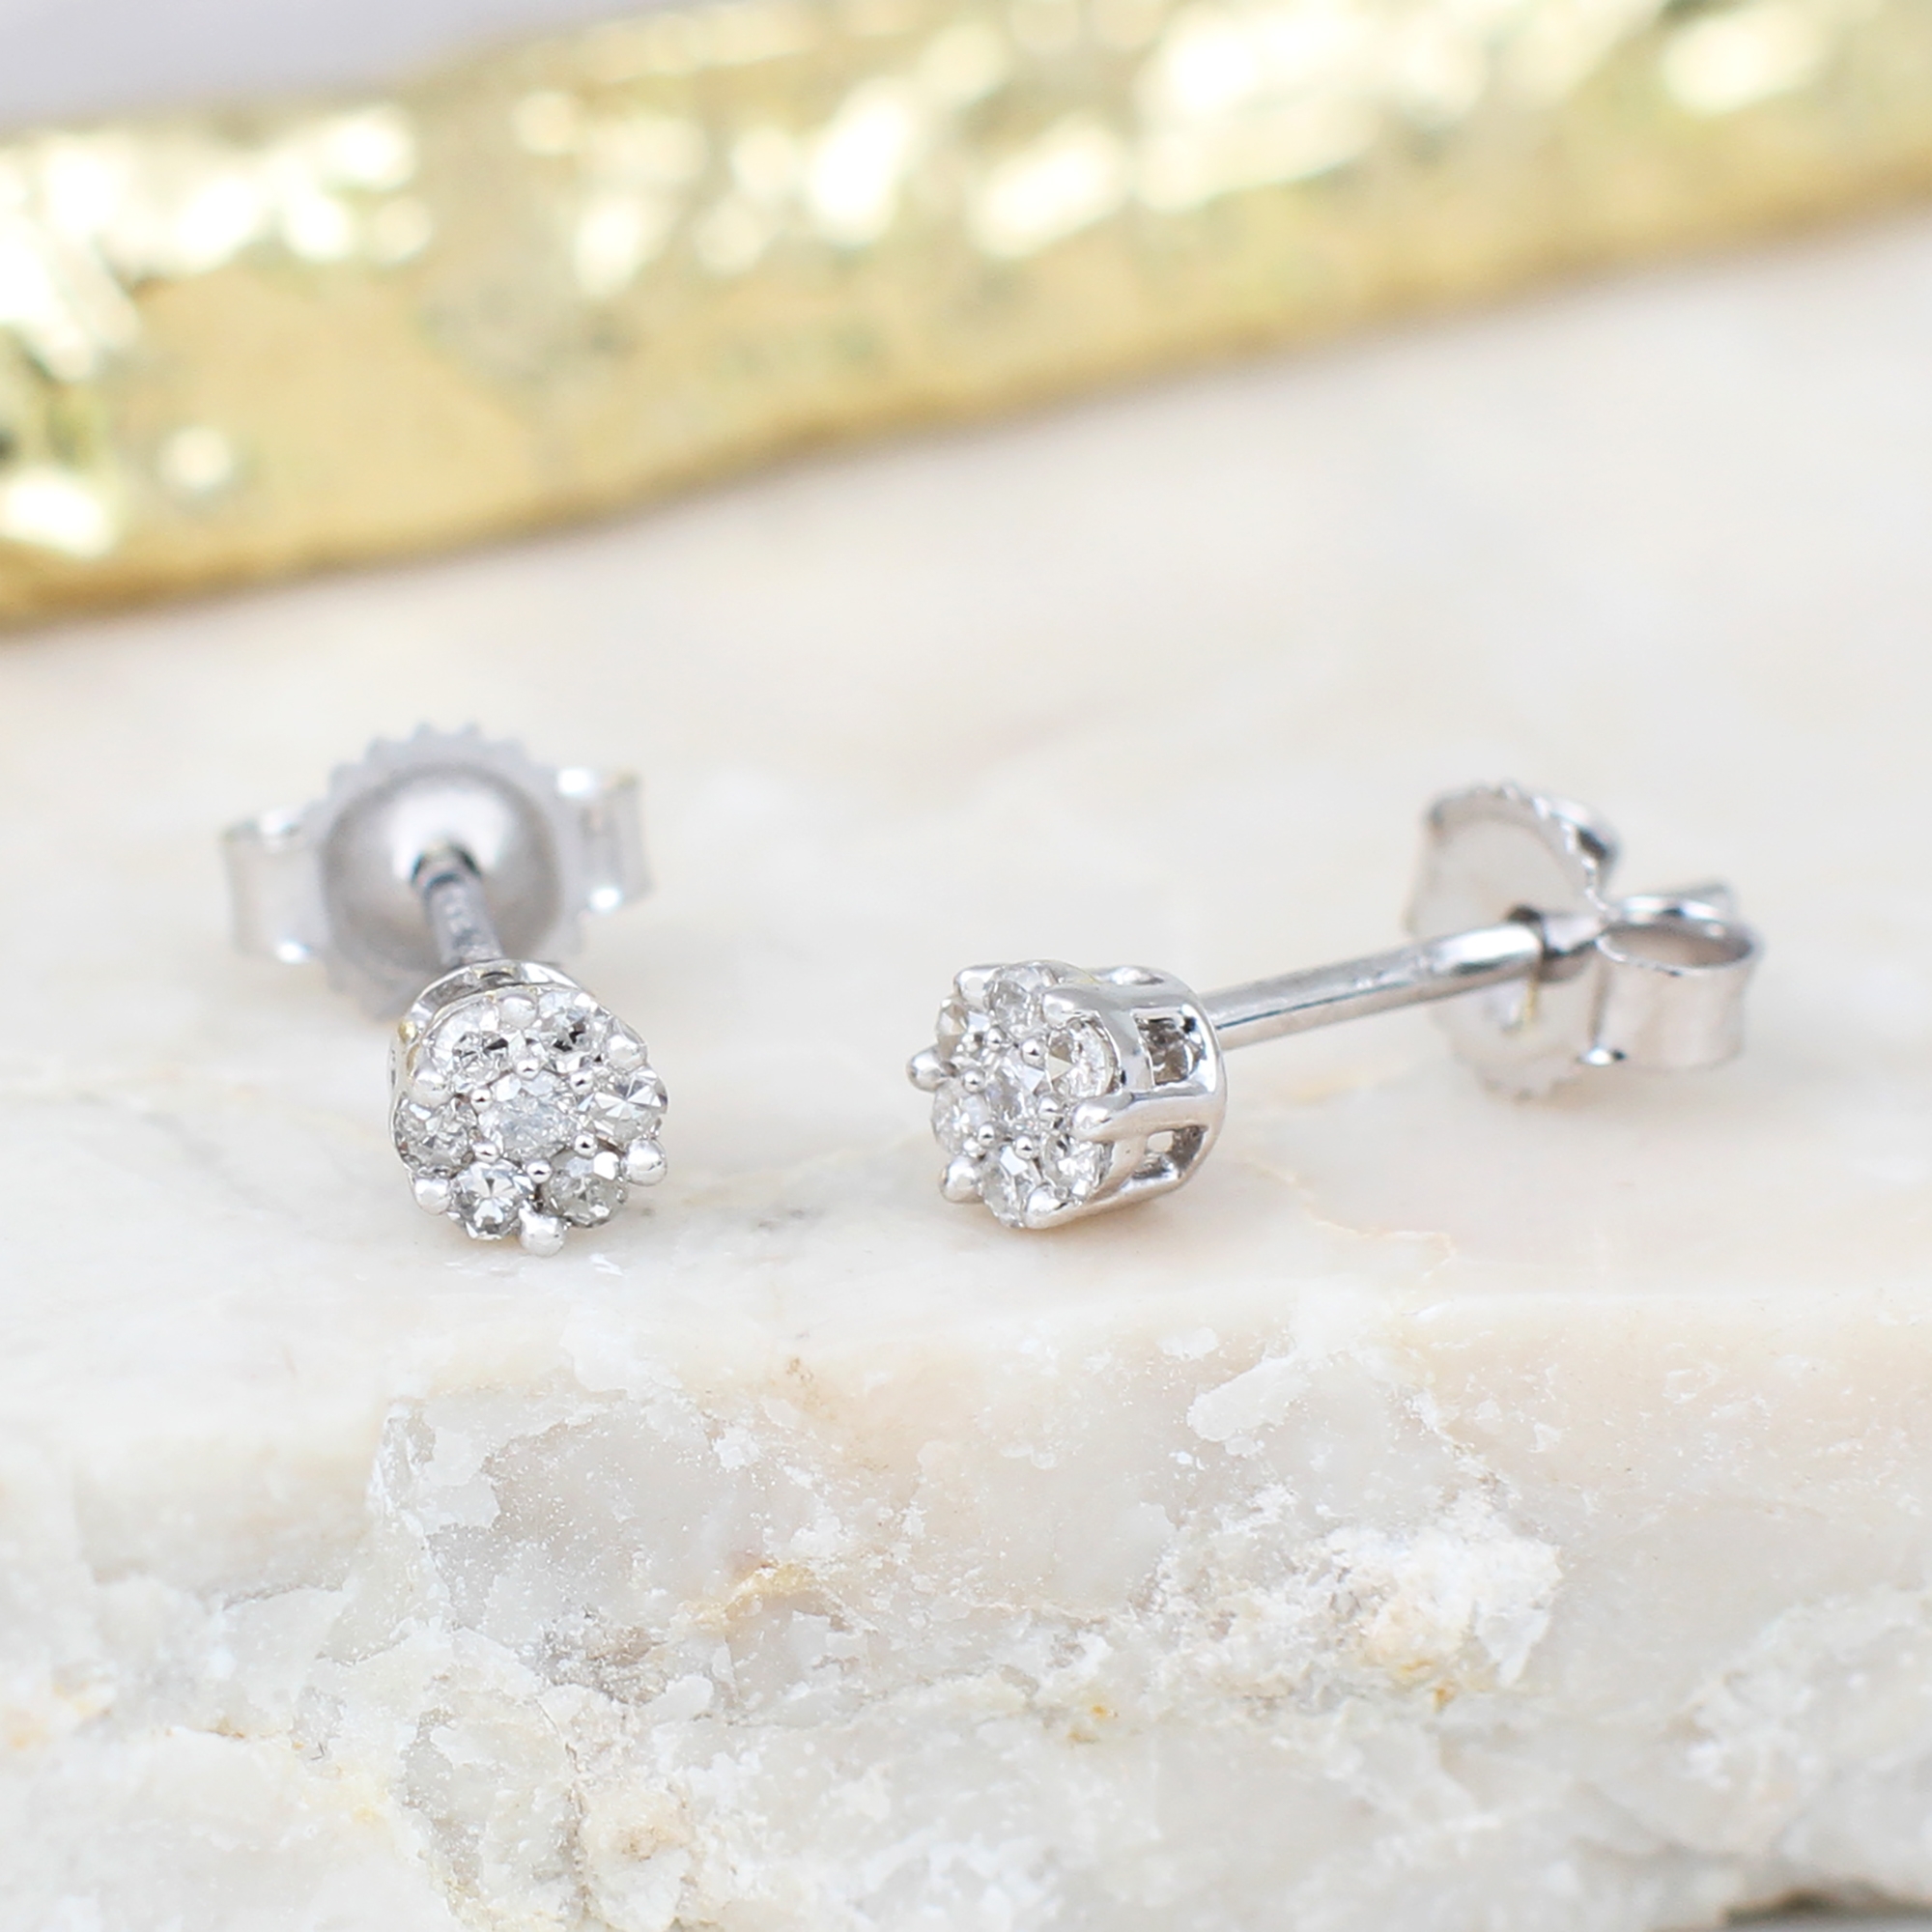 9 Ct White Gold And .10 Ct Diamond Cluster Earrings – Hurley Burley